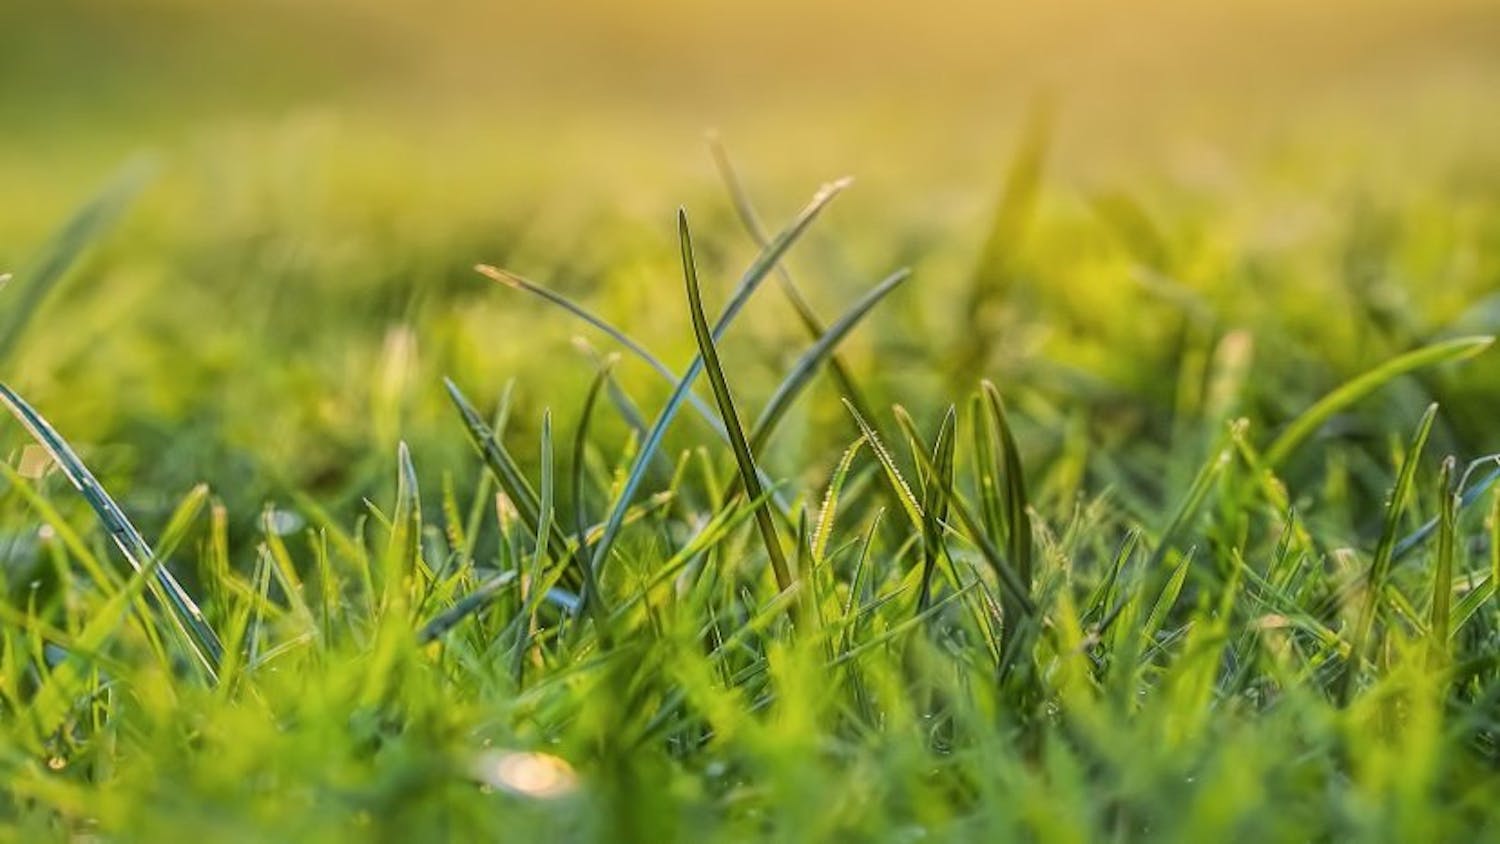 Farming: What's the grass like, is it growing?